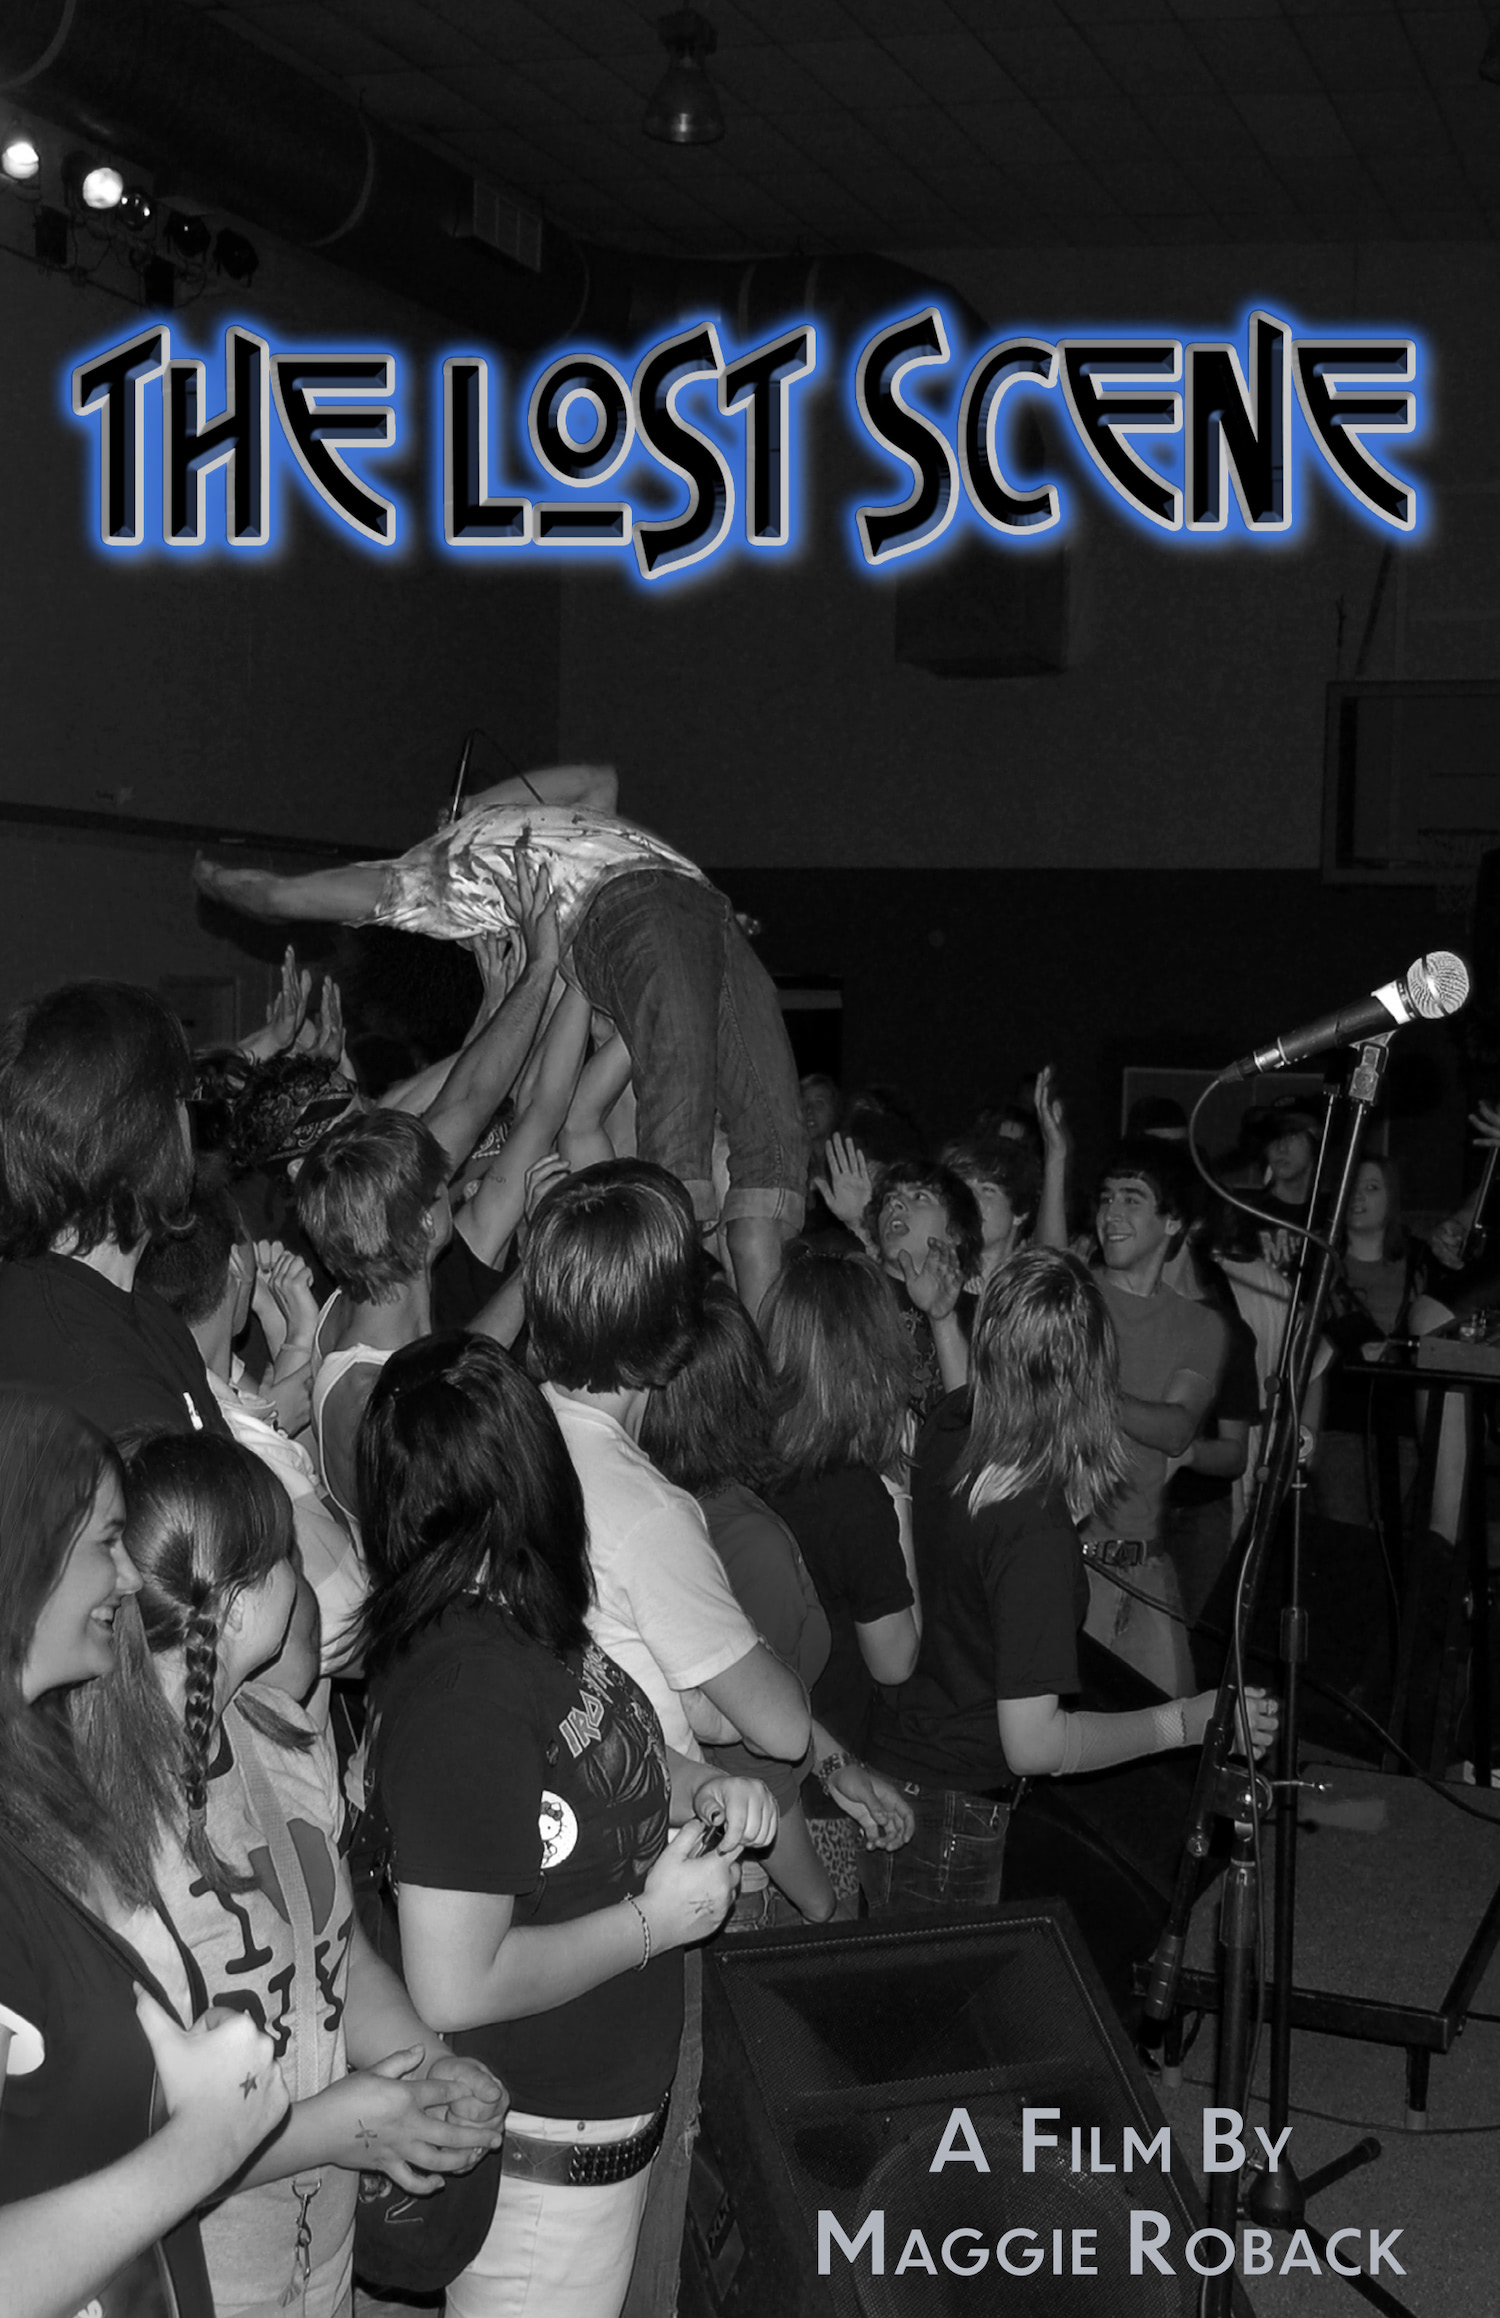 Text - The Lost Scene, A Film By Maggie RobackImage - A high school aged male dives off a small stage, backwards, into a crowd. Many arms reach up from the crowd to hold him up.